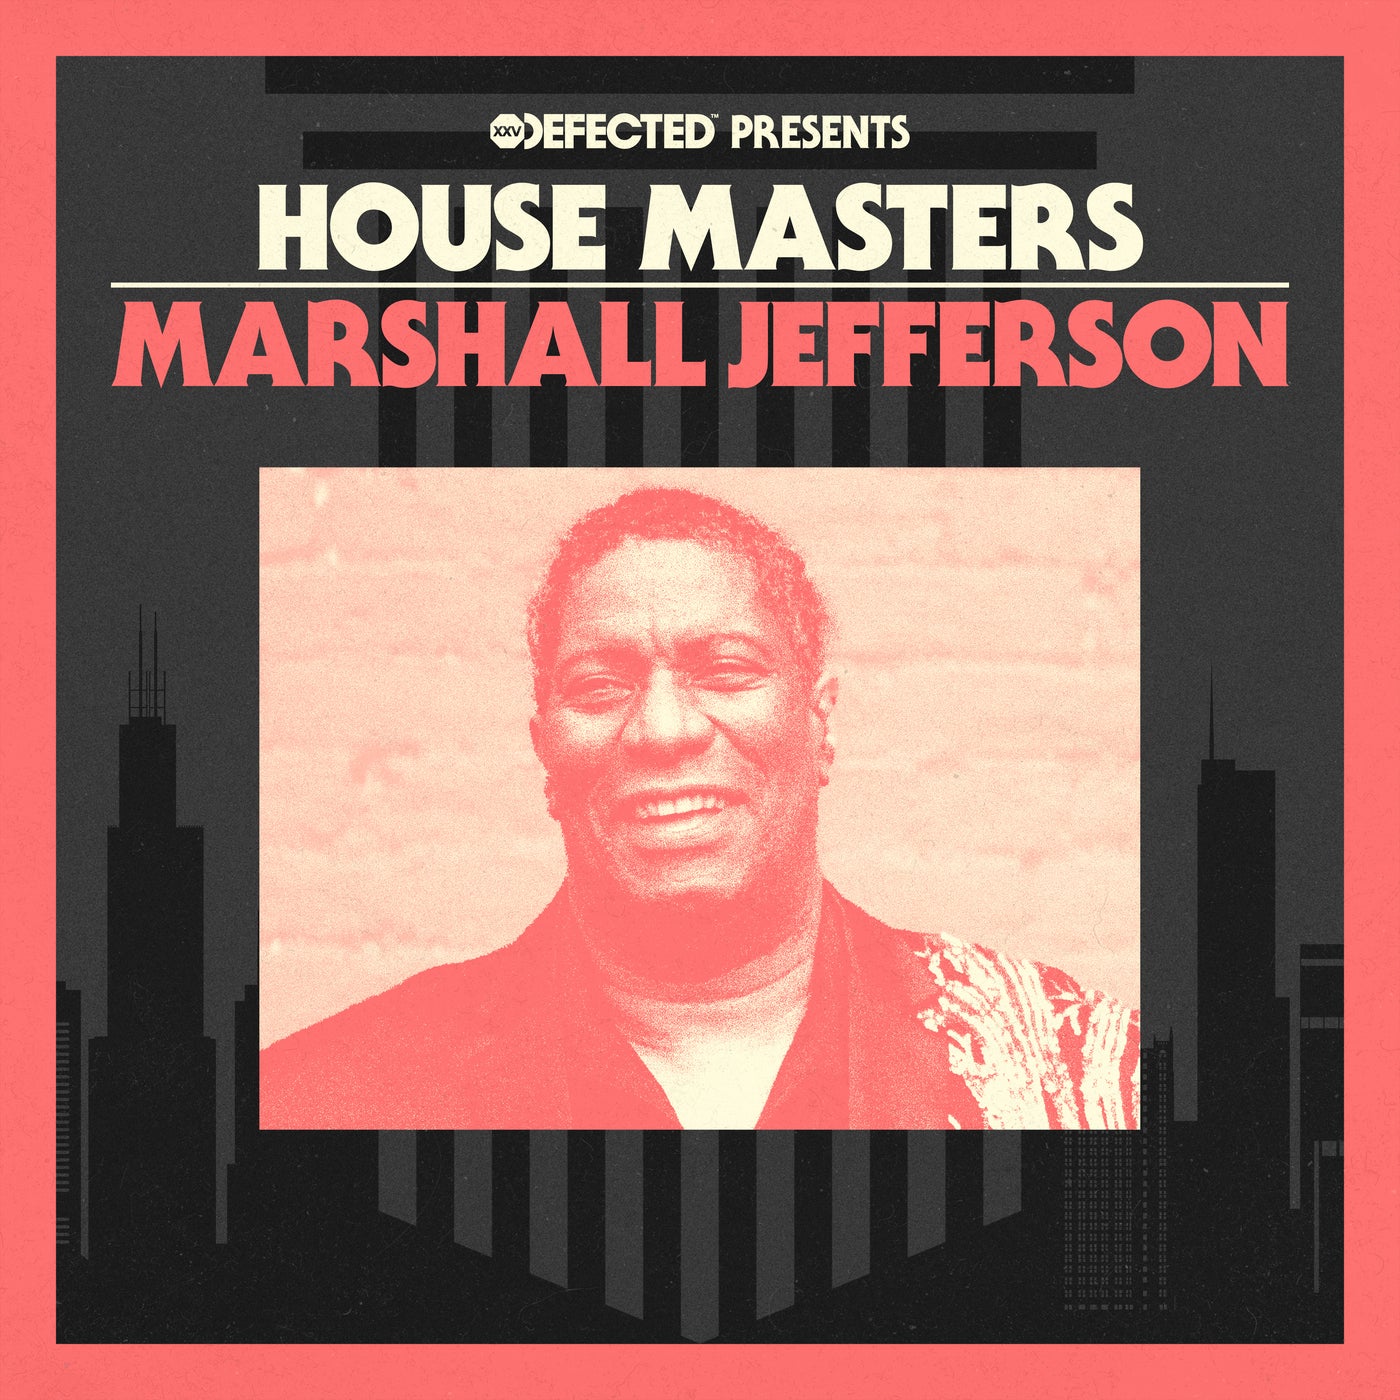 Release Cover: Defected presents House Masters - Marshall Jefferson Download Free on Electrobuzz